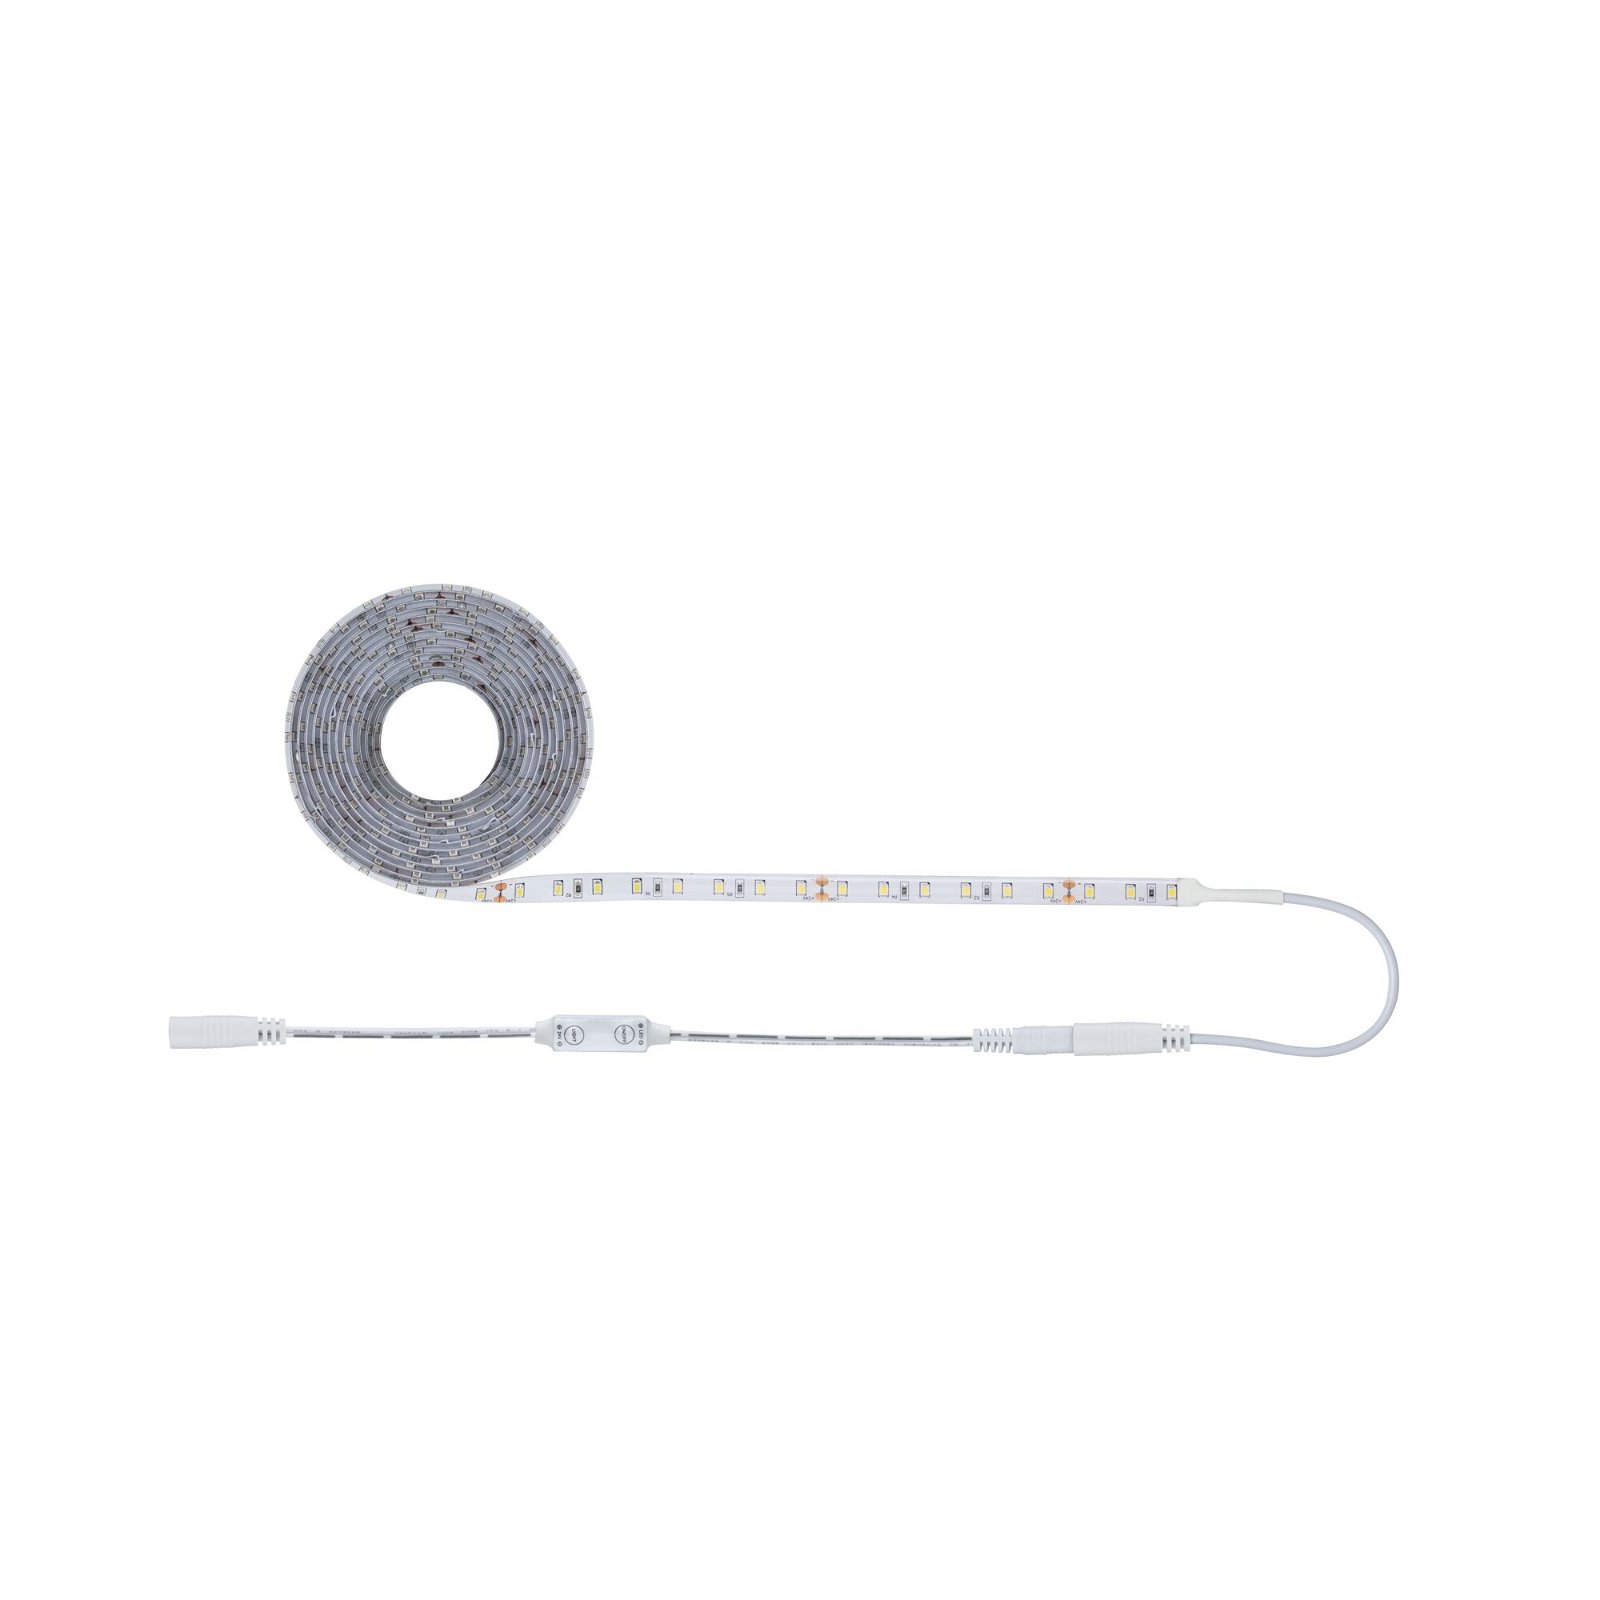 SimpLED Power LED Strip Neutral white incl. Dimm/Switch Complete set 3m  protect cover 33W 1060lm/